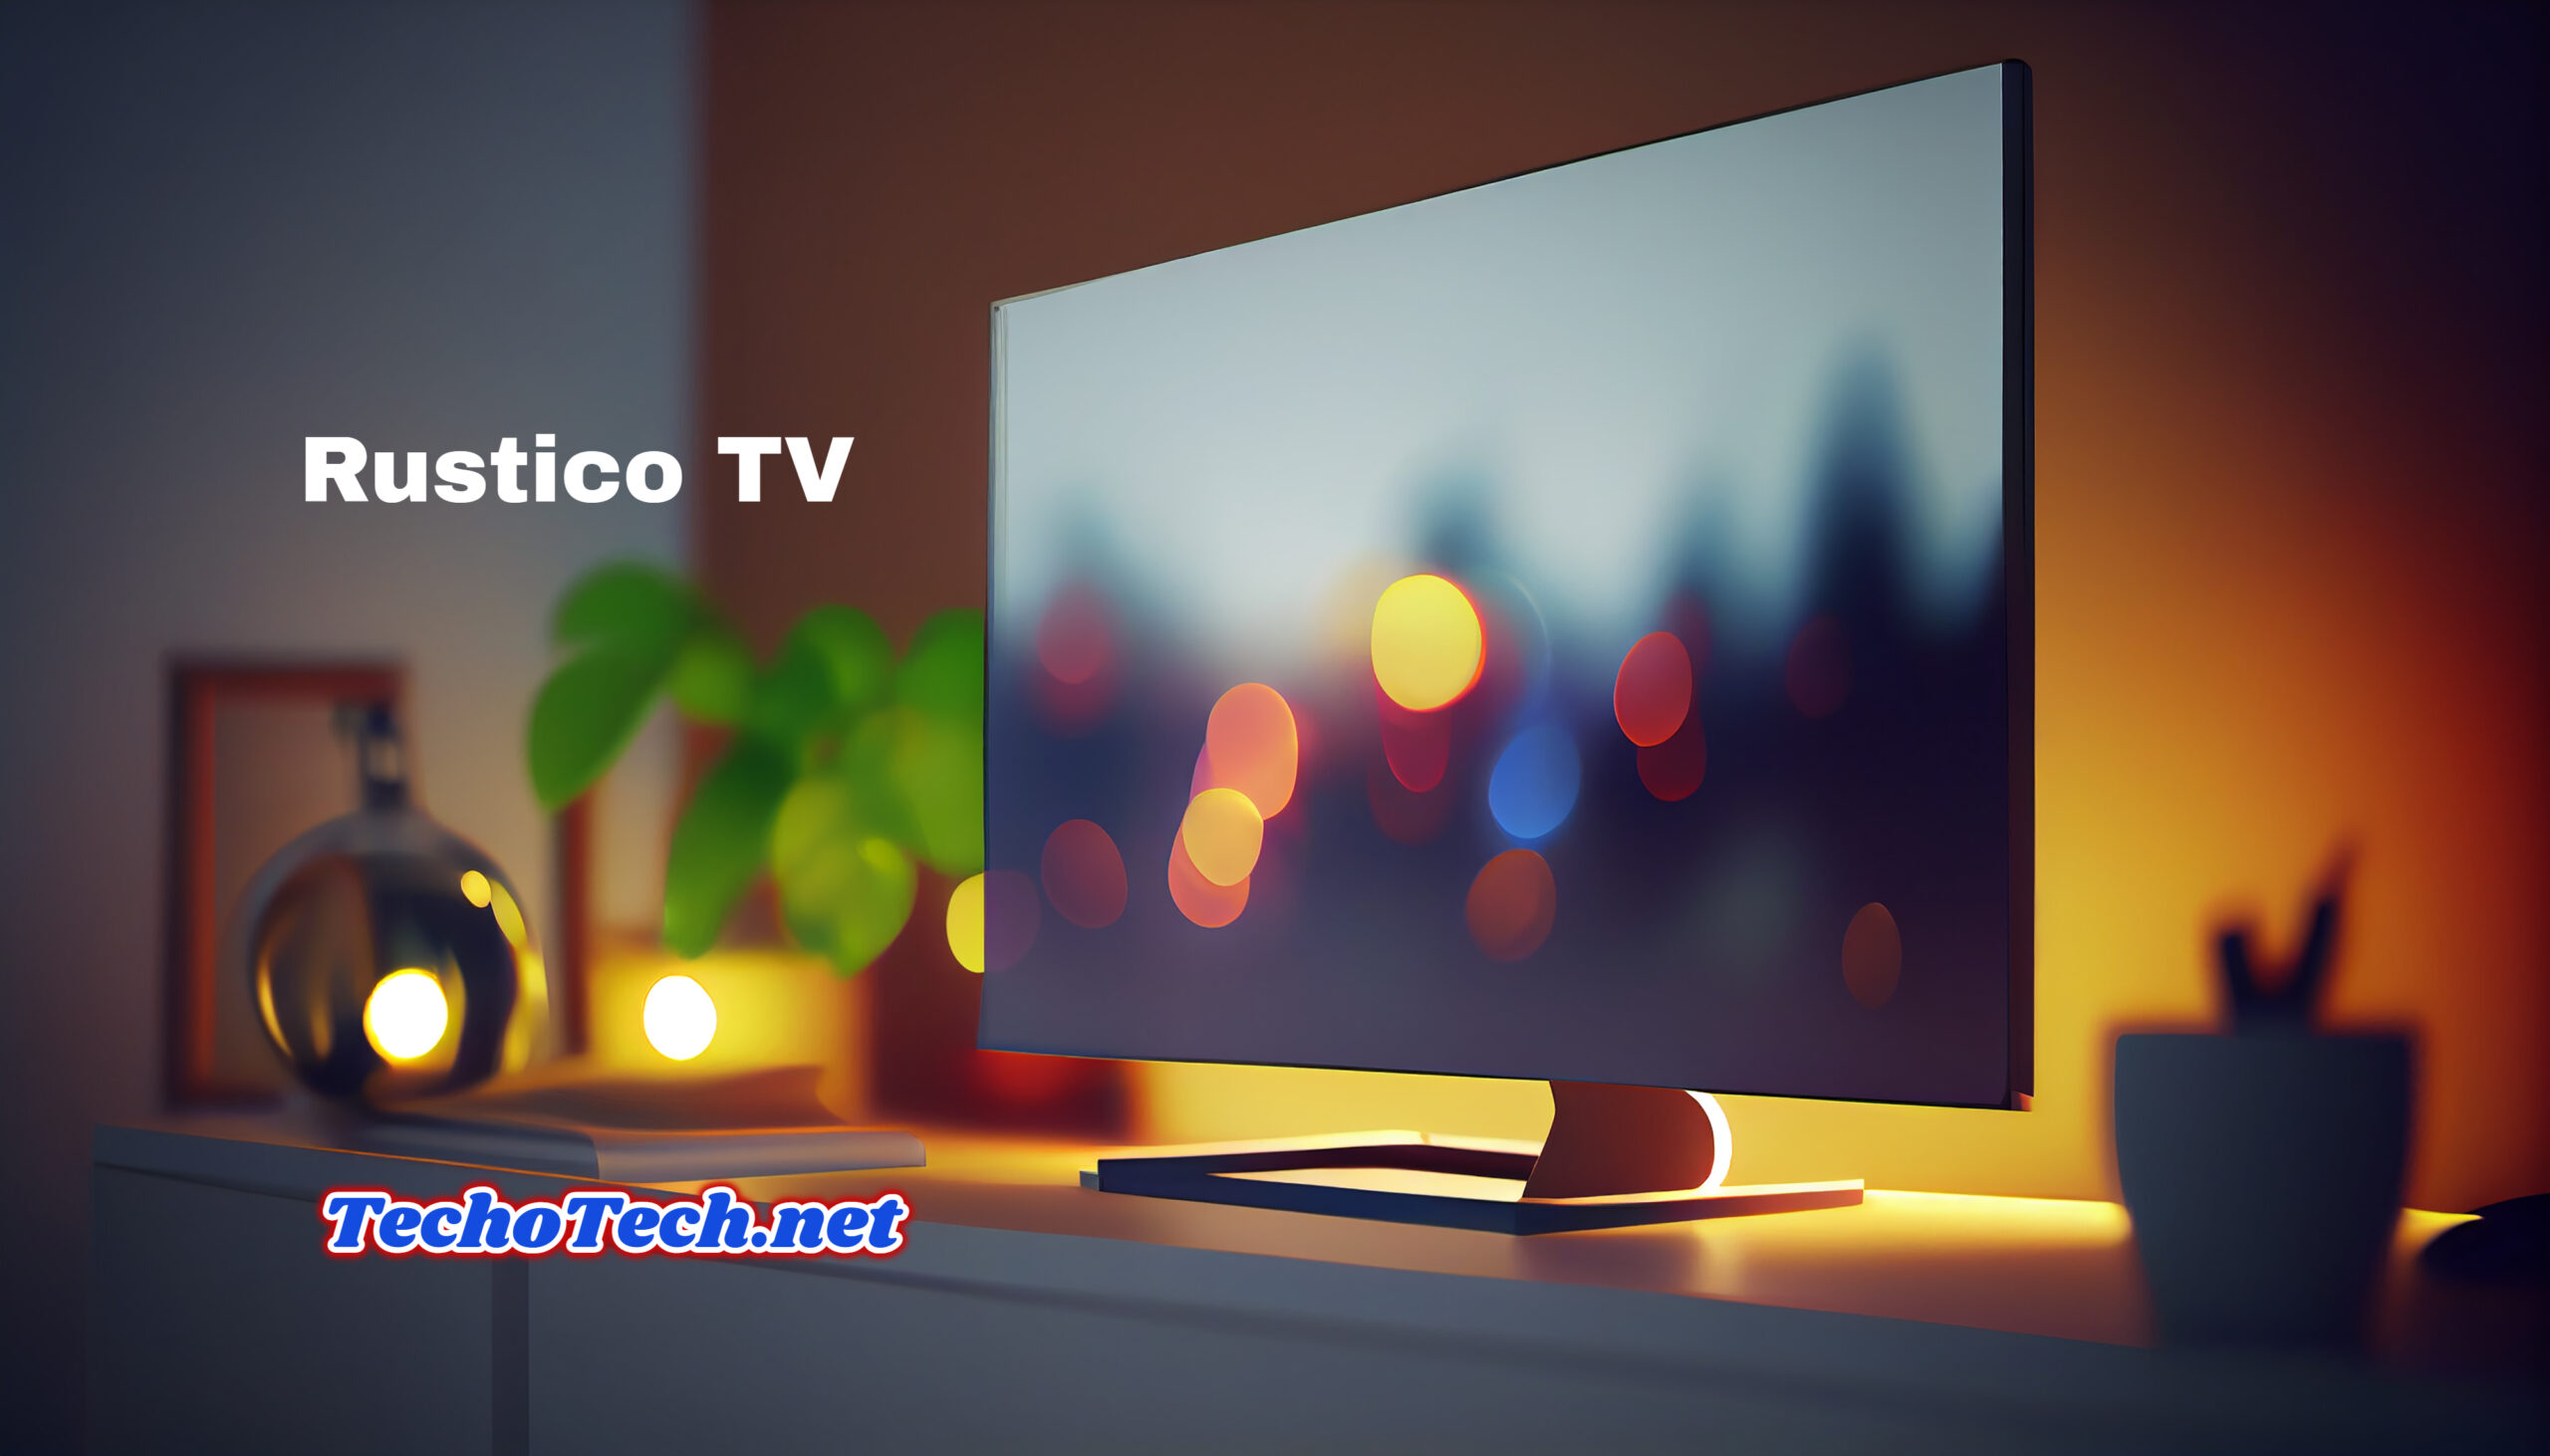 Rustico TV: Say Hello to a New Level of Home Entertainment